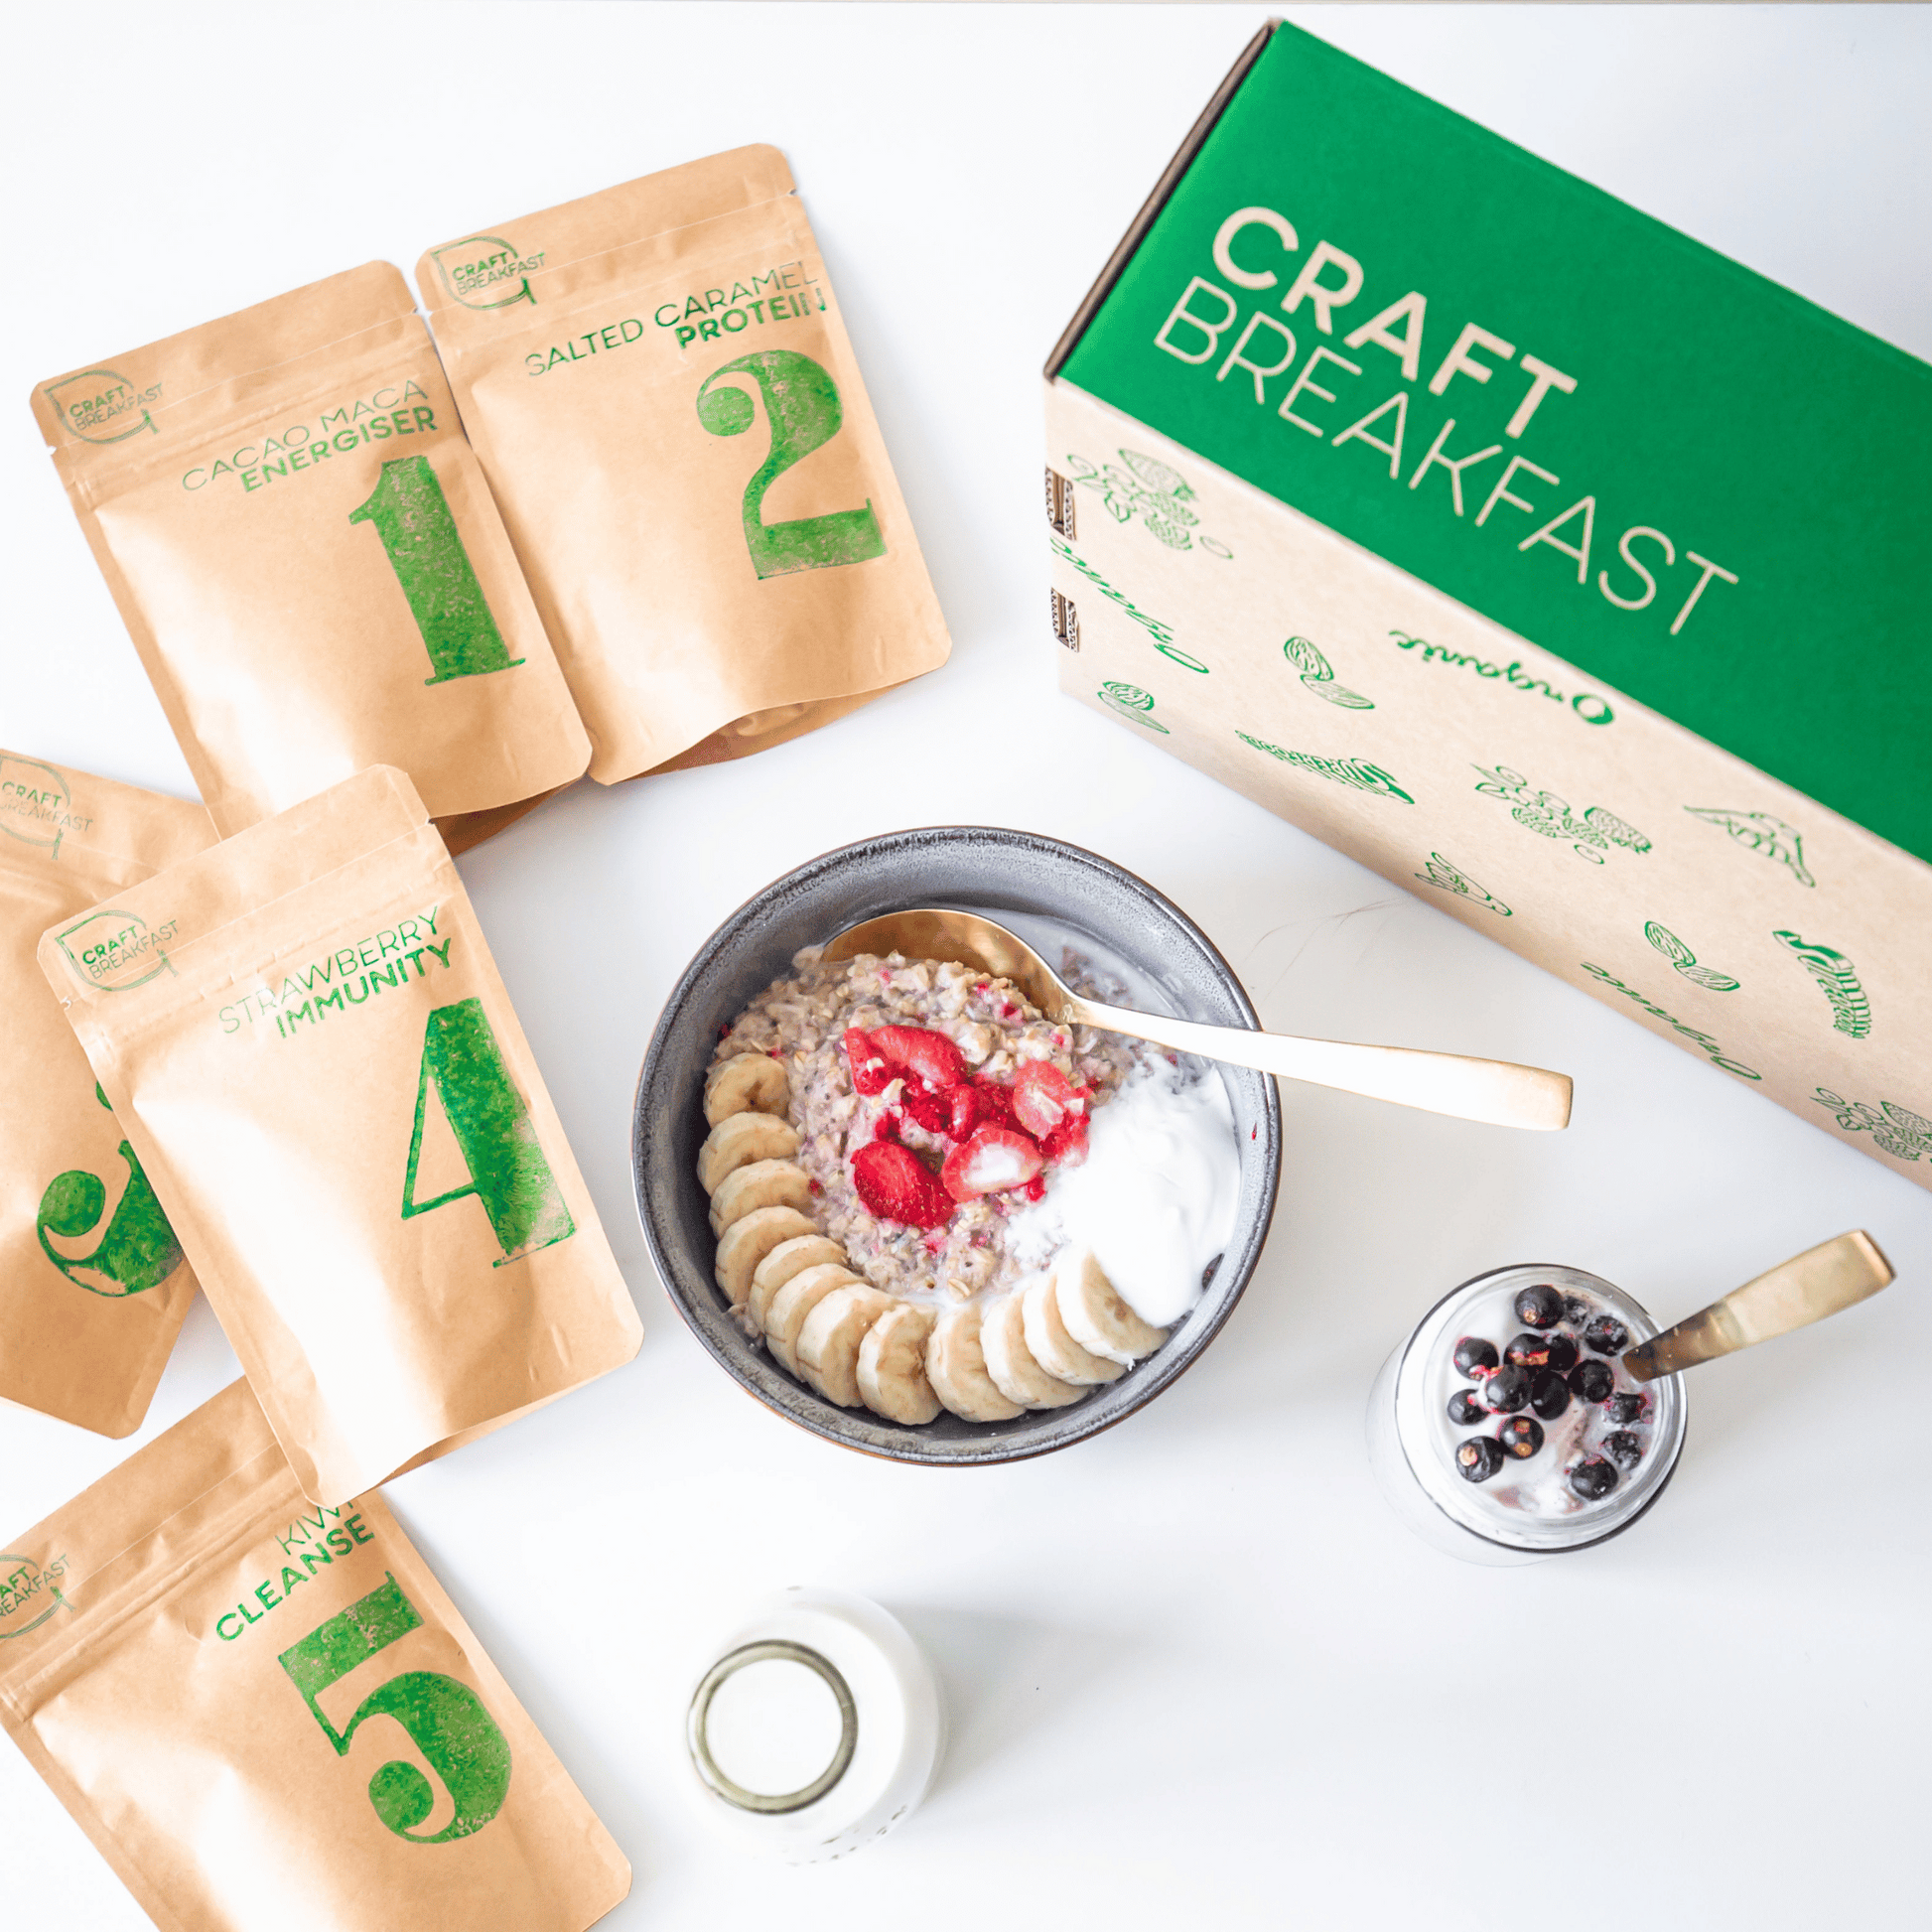 Superfood Breakfast pouches by Craft Breakfast